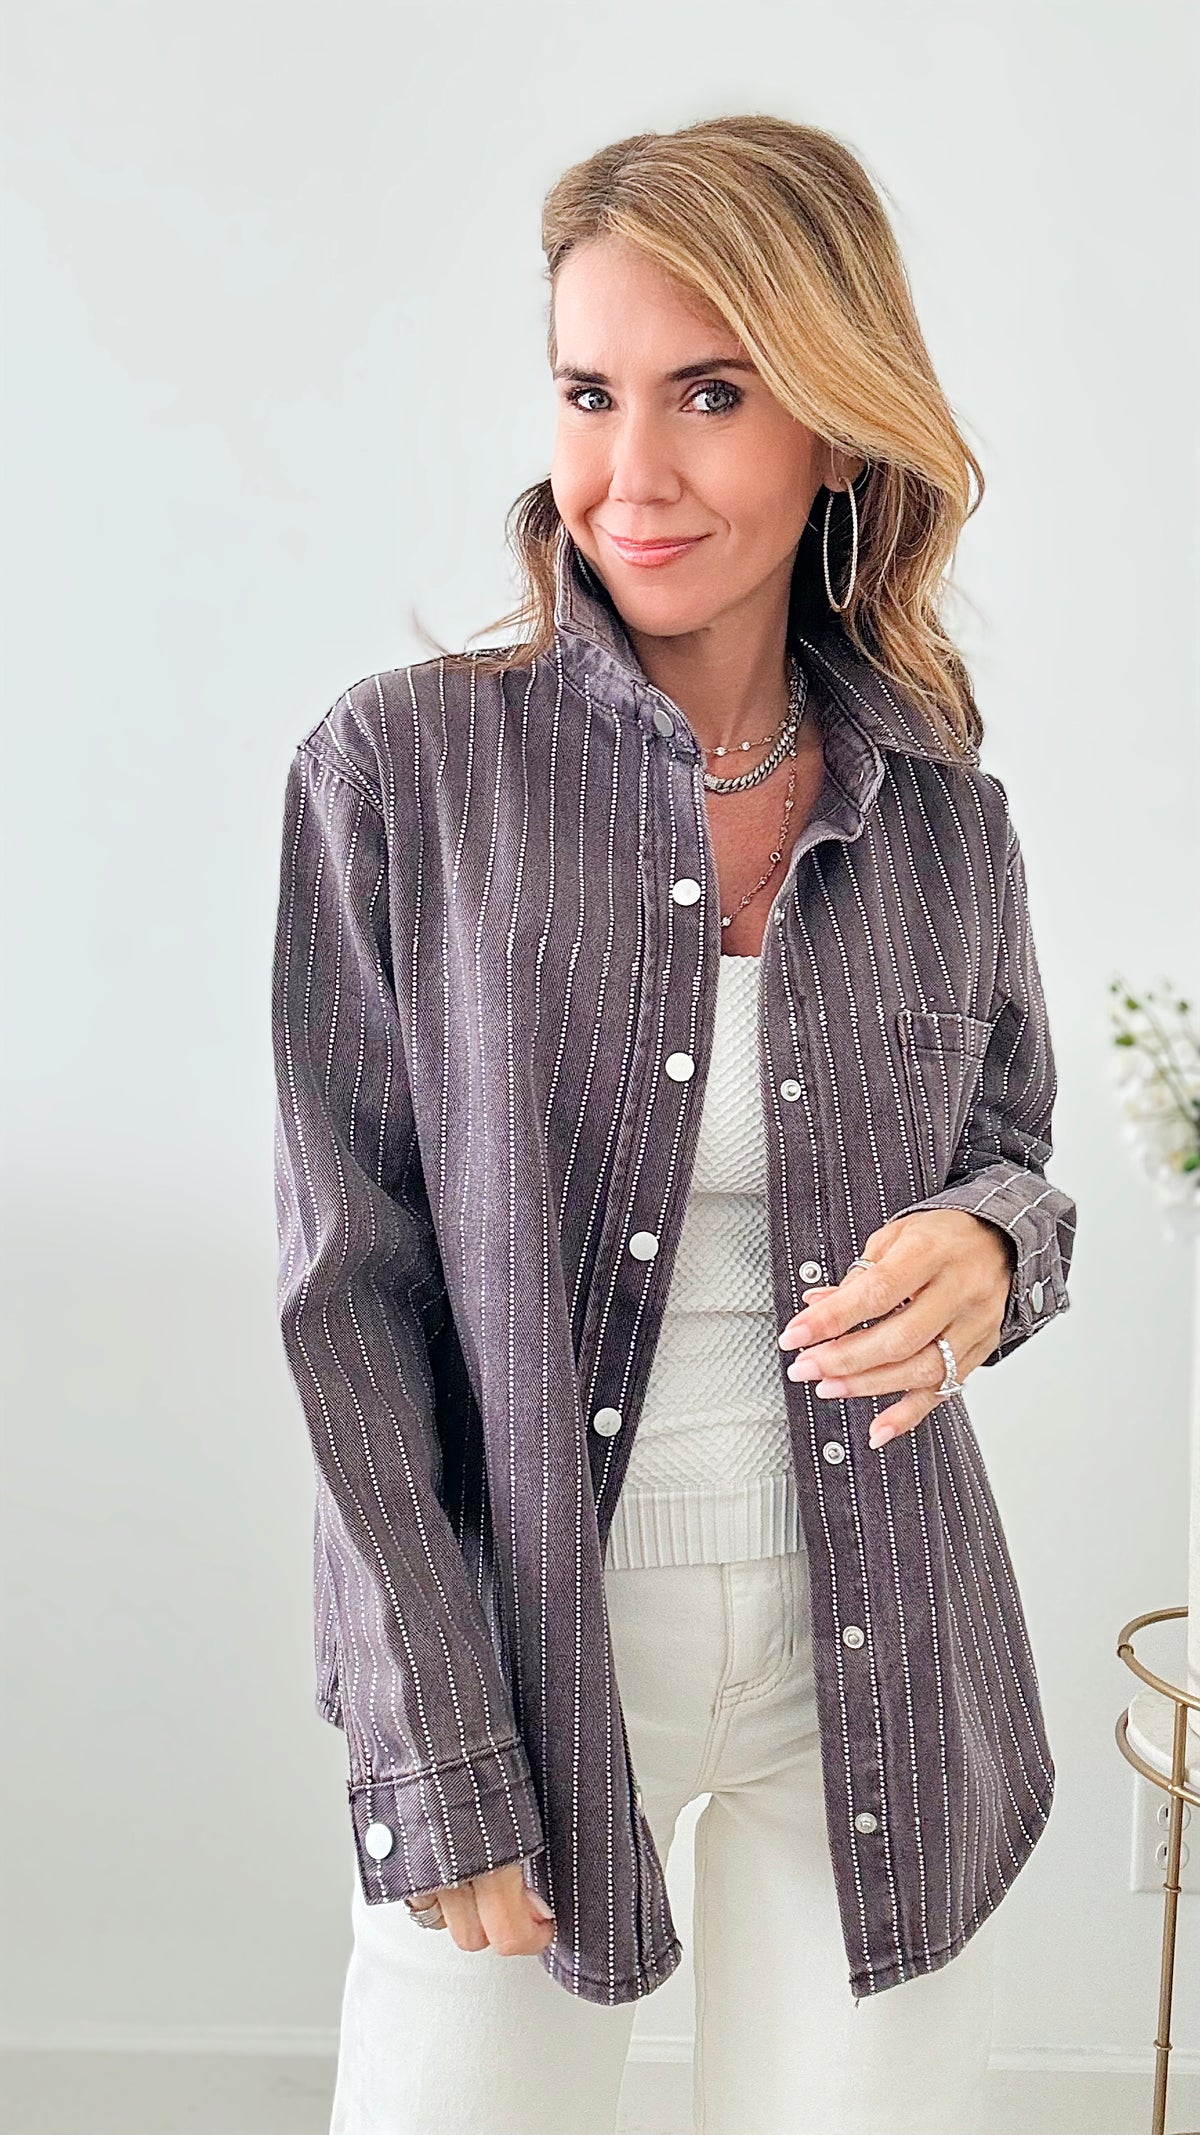 Embellished Rhinestone Striped Jacket - Charcoal-160 Jackets-Rousseau-Coastal Bloom Boutique, find the trendiest versions of the popular styles and looks Located in Indialantic, FL